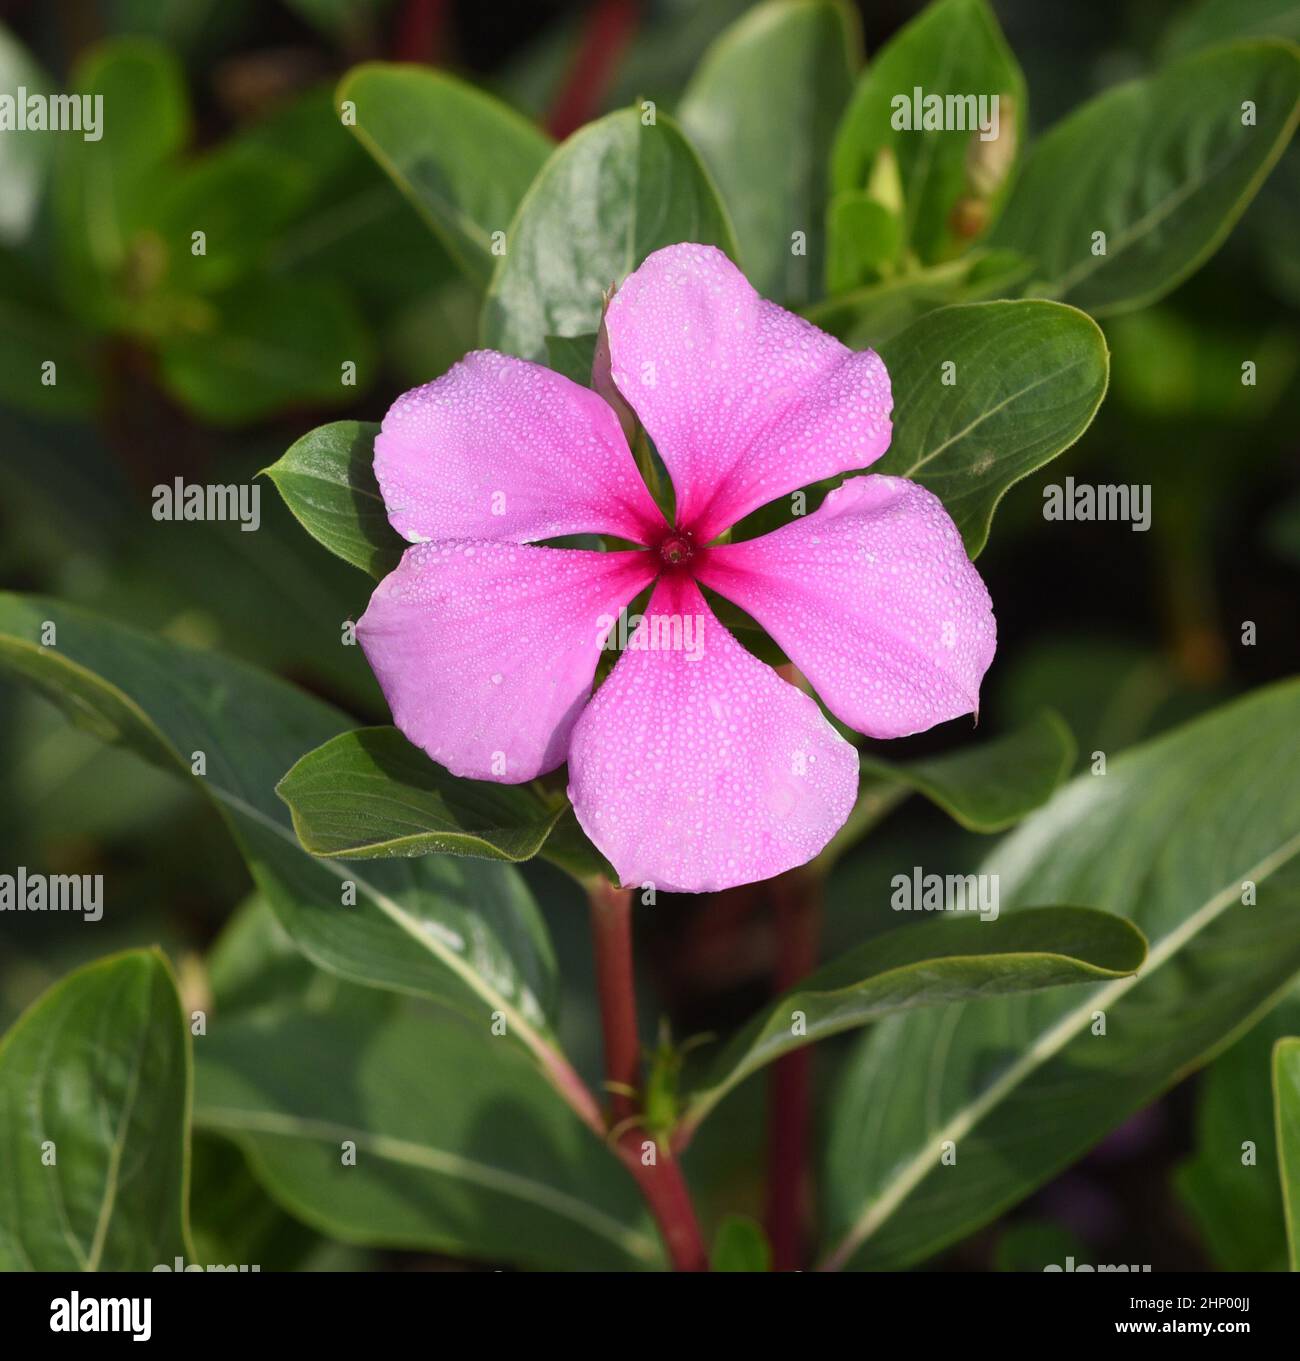 Madagascar evergreen, Cathranthus roseus, is an important medicinal plant with pink or white flowers and is used in medicine. Stock Photo